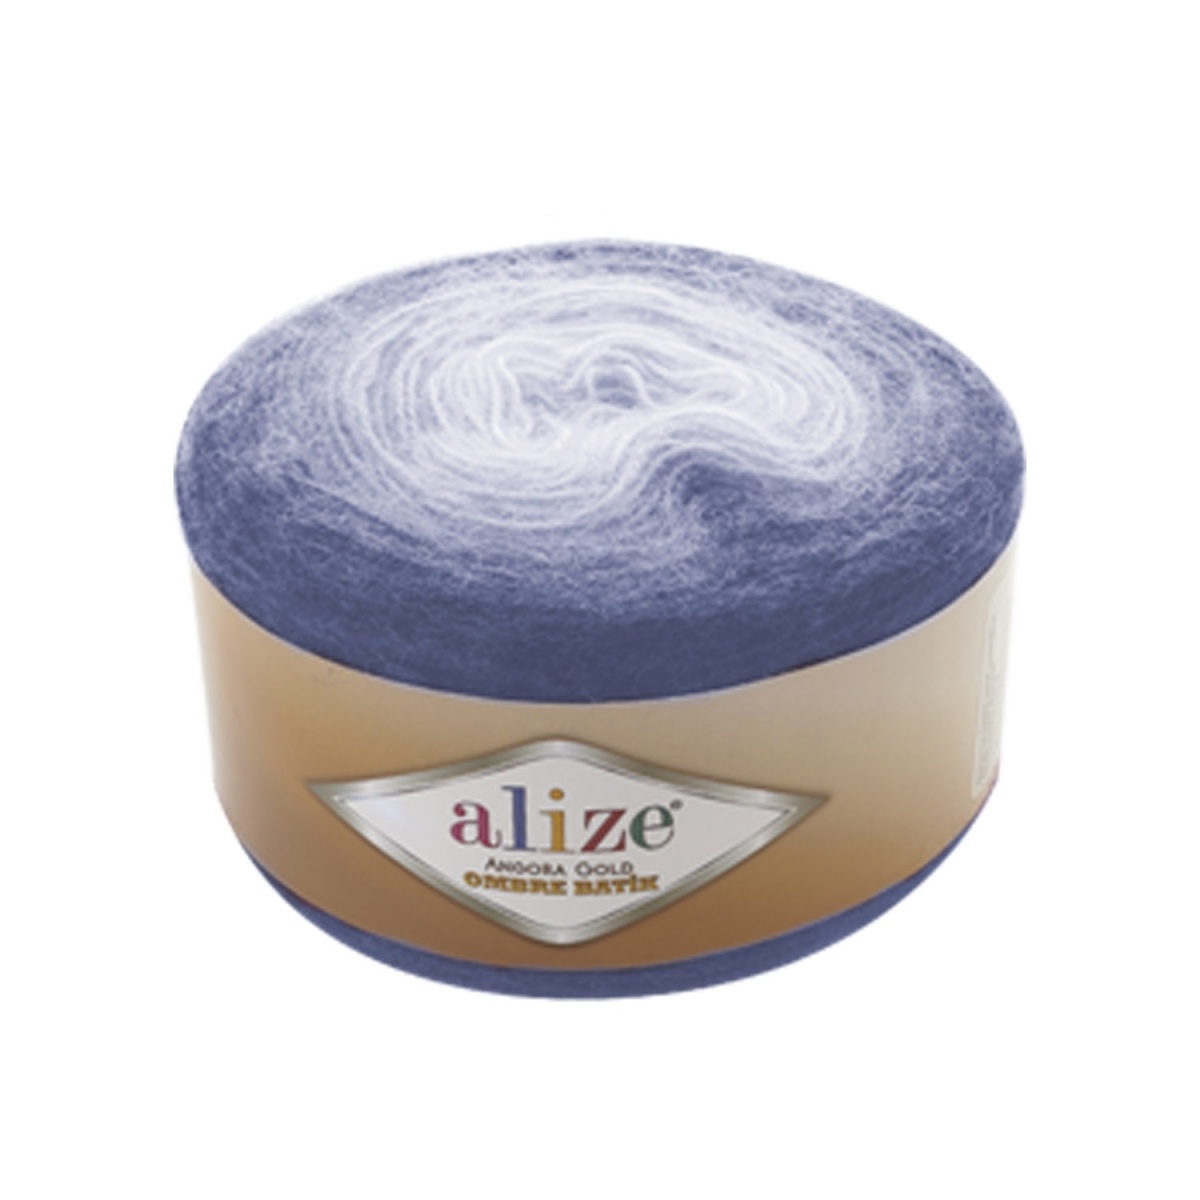 Alize Angora Gold Ombre Batik, 20% Wool, 80% Acrylic 4 Skein Value Pack, 600g фото 1